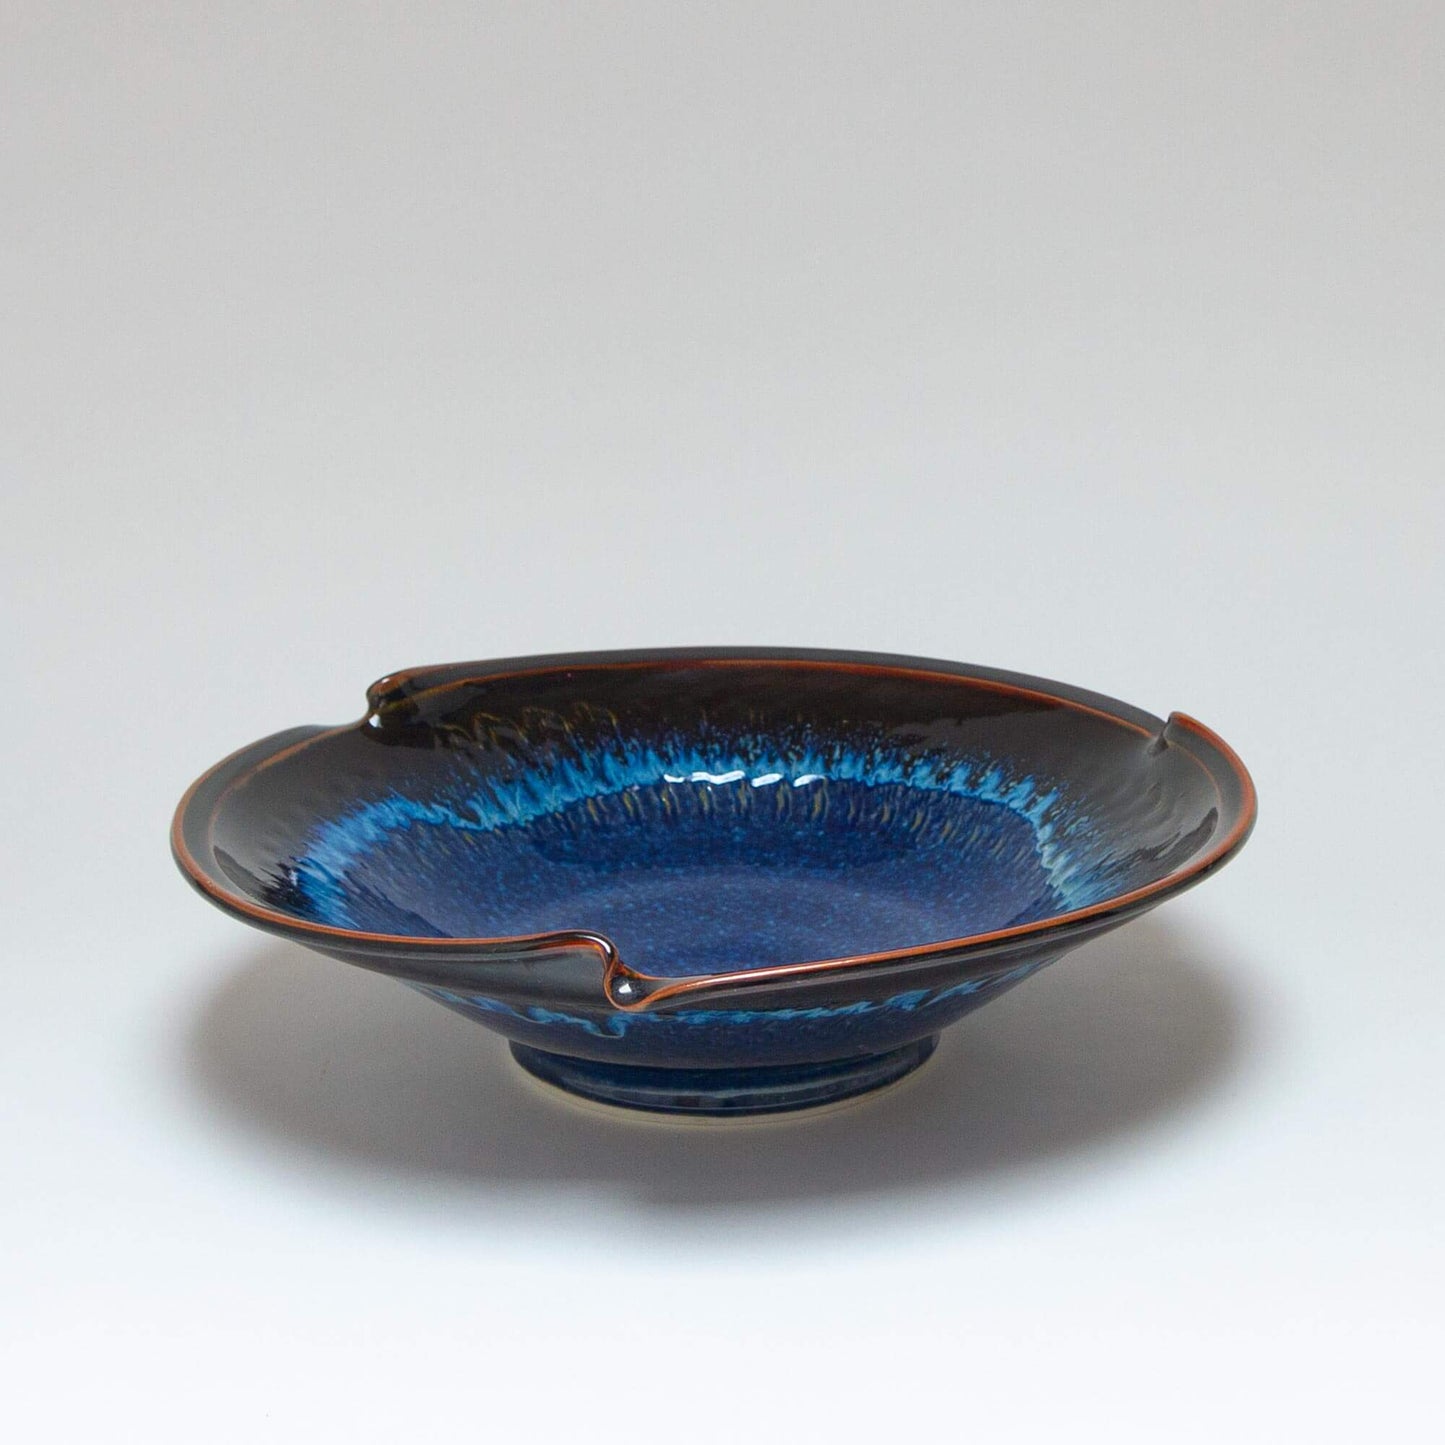 Handmade Pottery Signature Wave Bowl in Blue Hamada pattern made by Georgetown Pottery in Maine